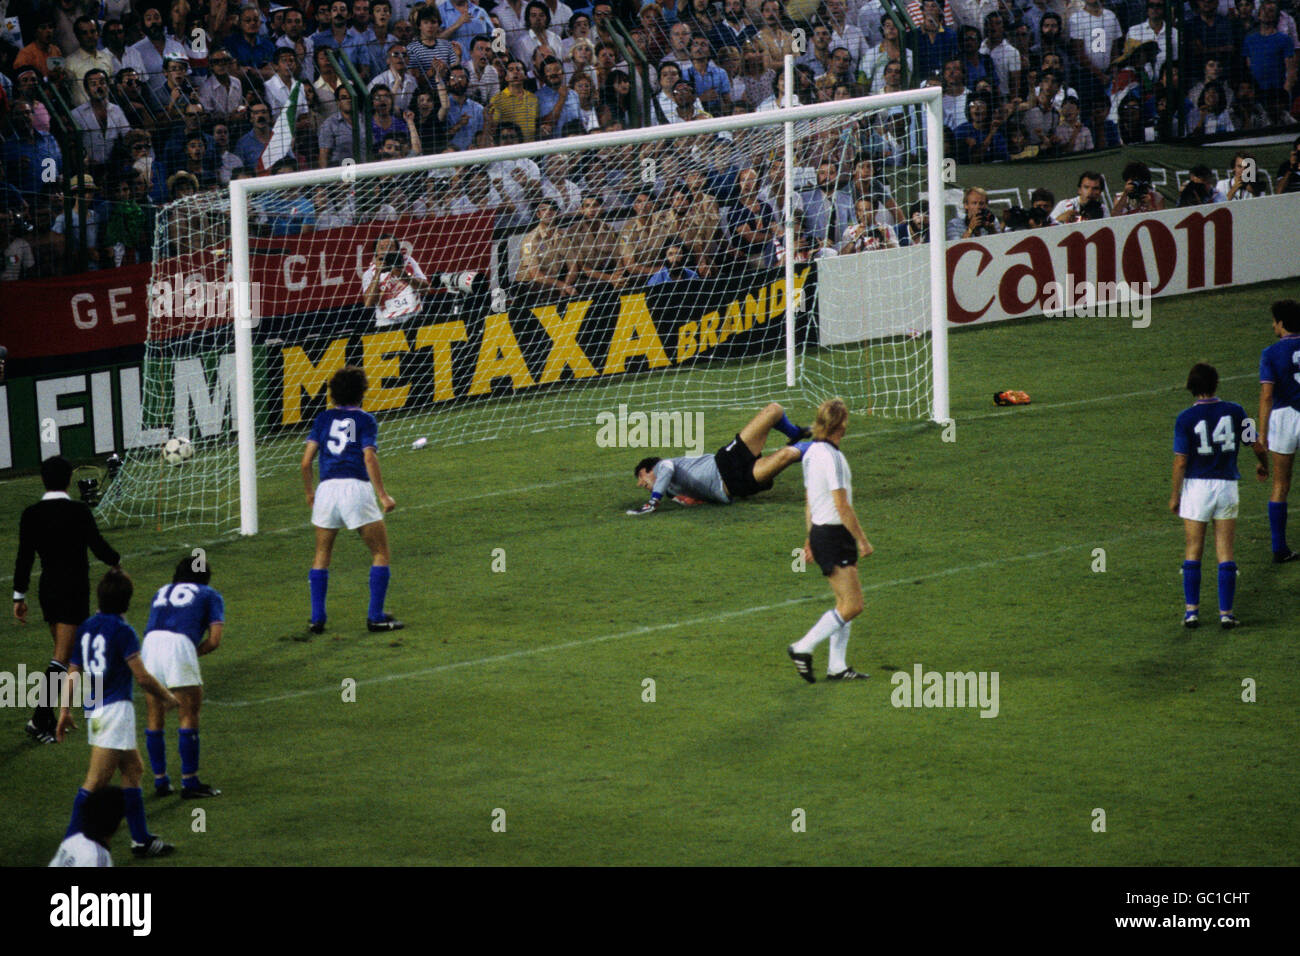 Soccer - FIFA World Cup Final 1982 - Italy v West Germany - Santiago Bernabeu Stadium. Italy goalkeeper Dino Zoff (c) can only watch as Paul Breitner (not pictured) scores a consolation goal for West Germany. Stock Photo